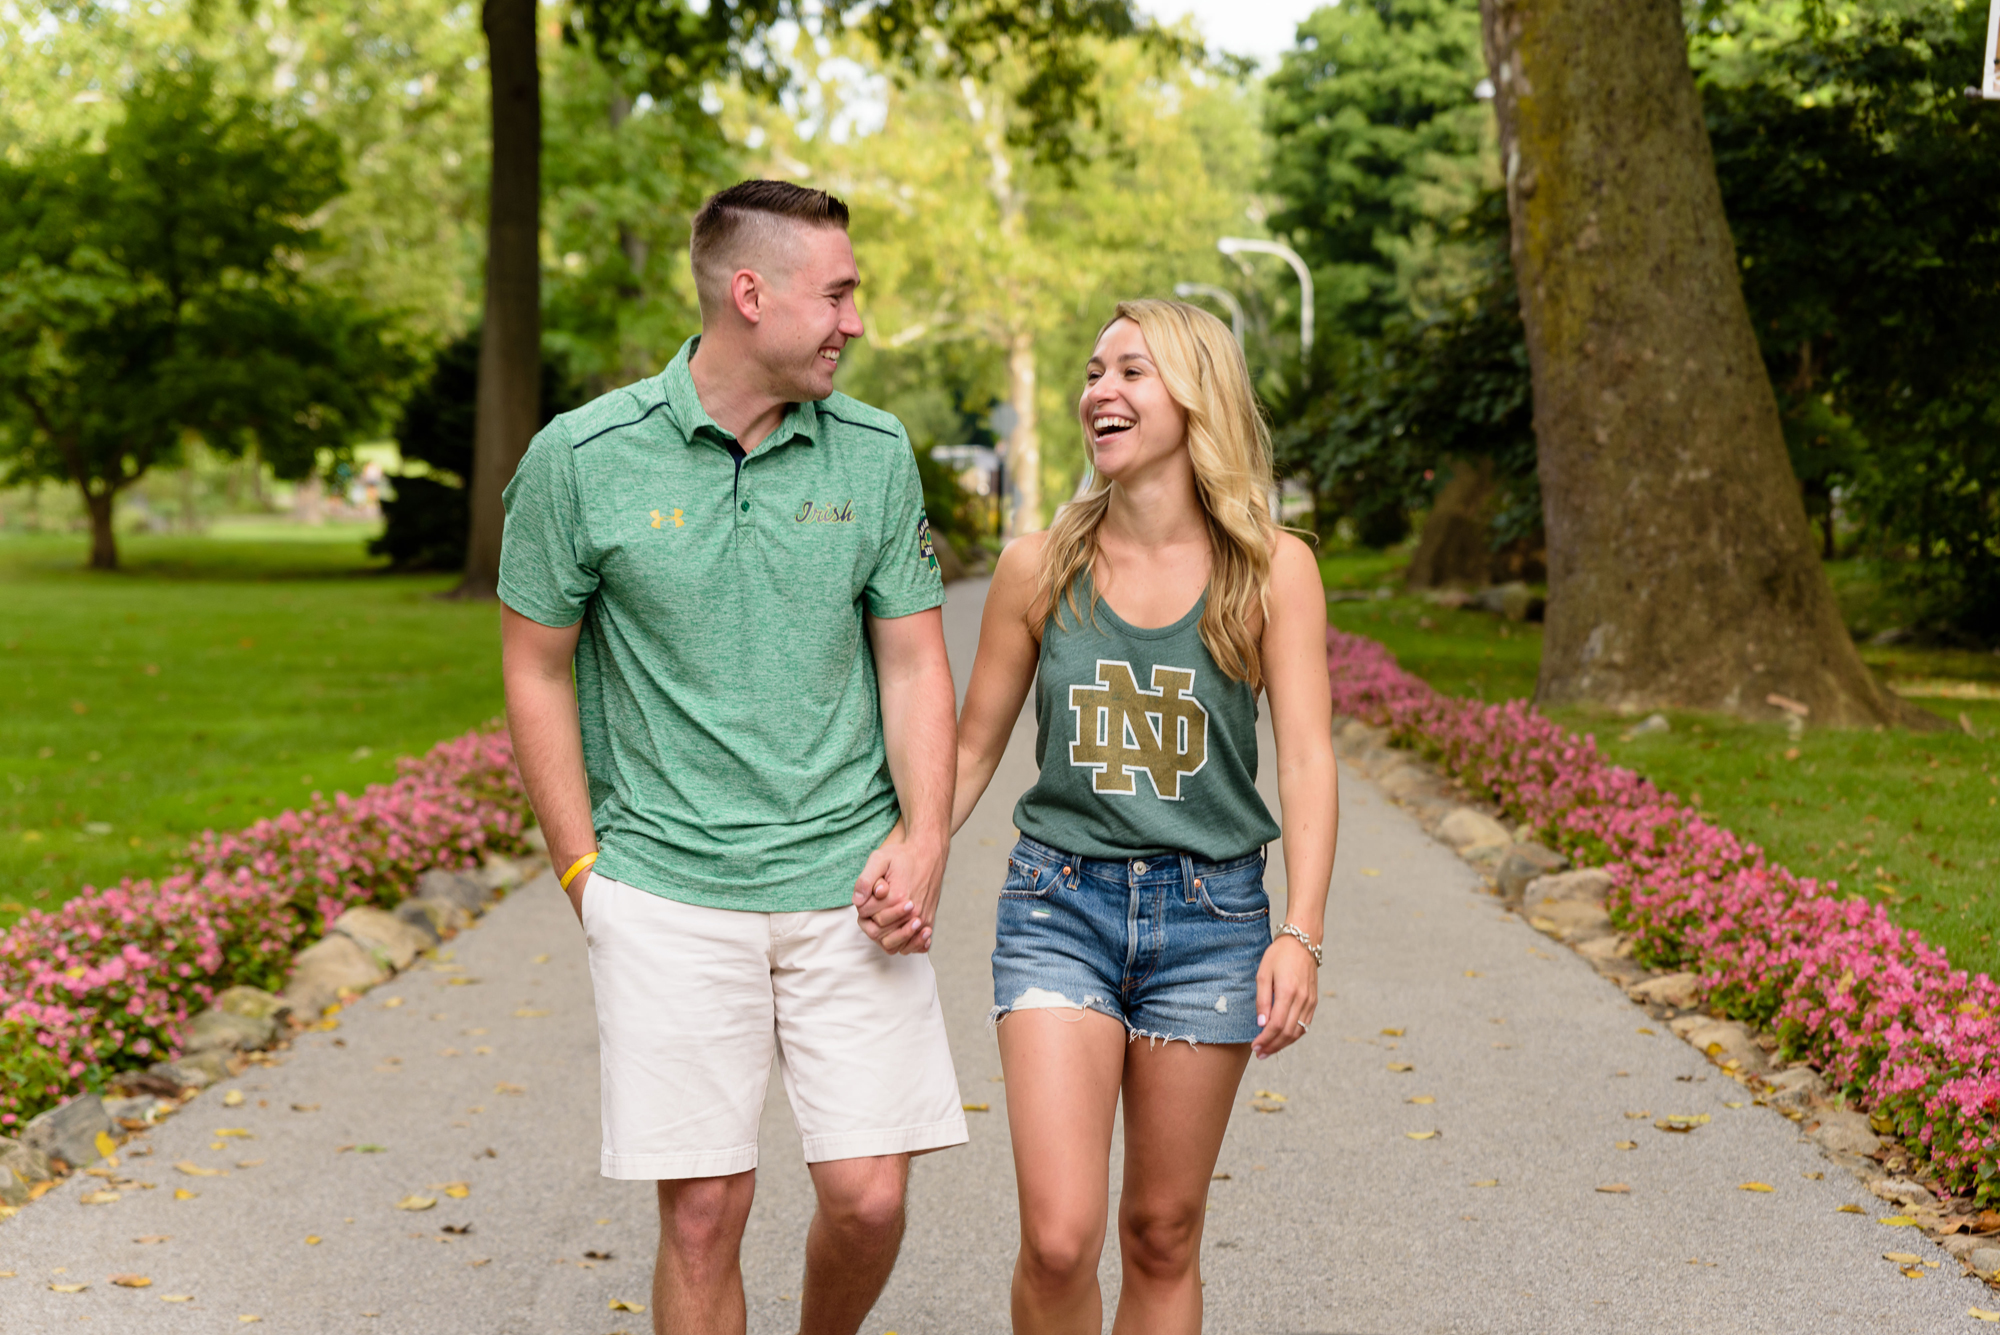 Newly engaged couple posed for photos by the lake after he proposed on the campus of University of Notre Dame